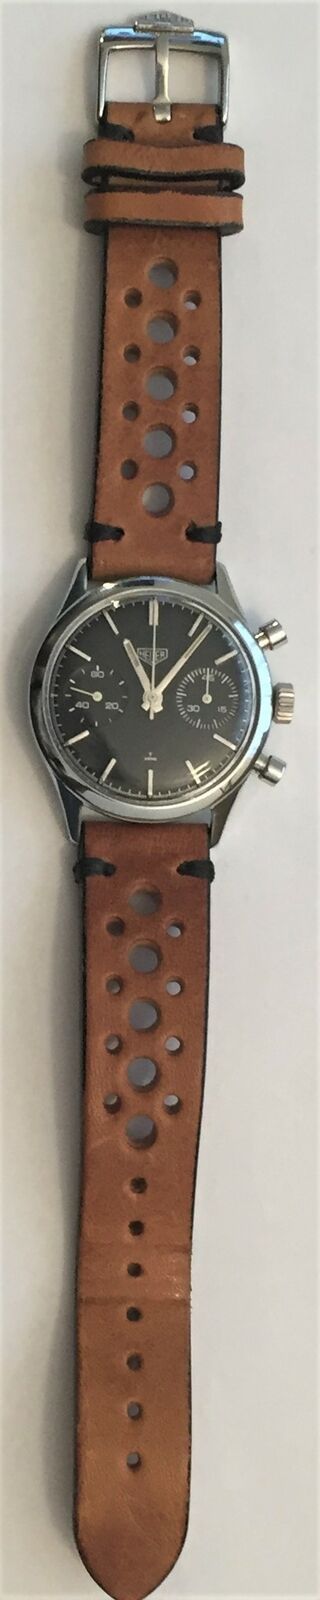 Mens Vintage Heuer Chronograph Stainless Steel Watch Ref 3641 6